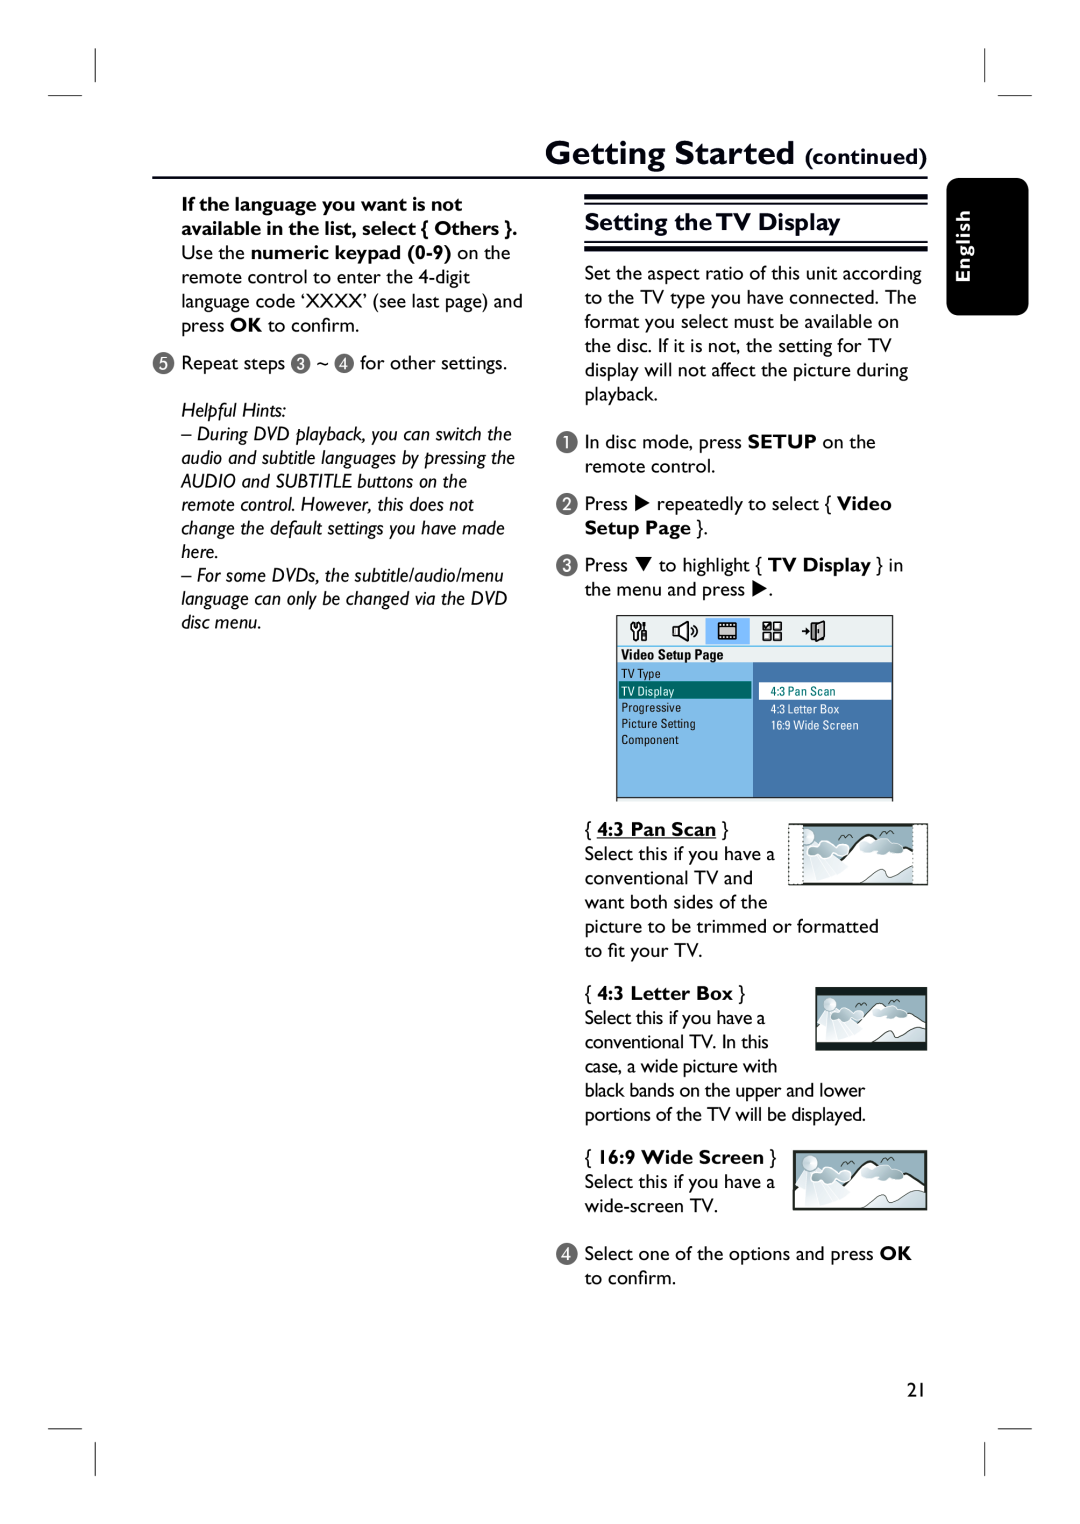 Philips HTS3154 user manual Setting the TV Display, Setup Page, 4 3 Pan Scan, Getting Started continued, English 